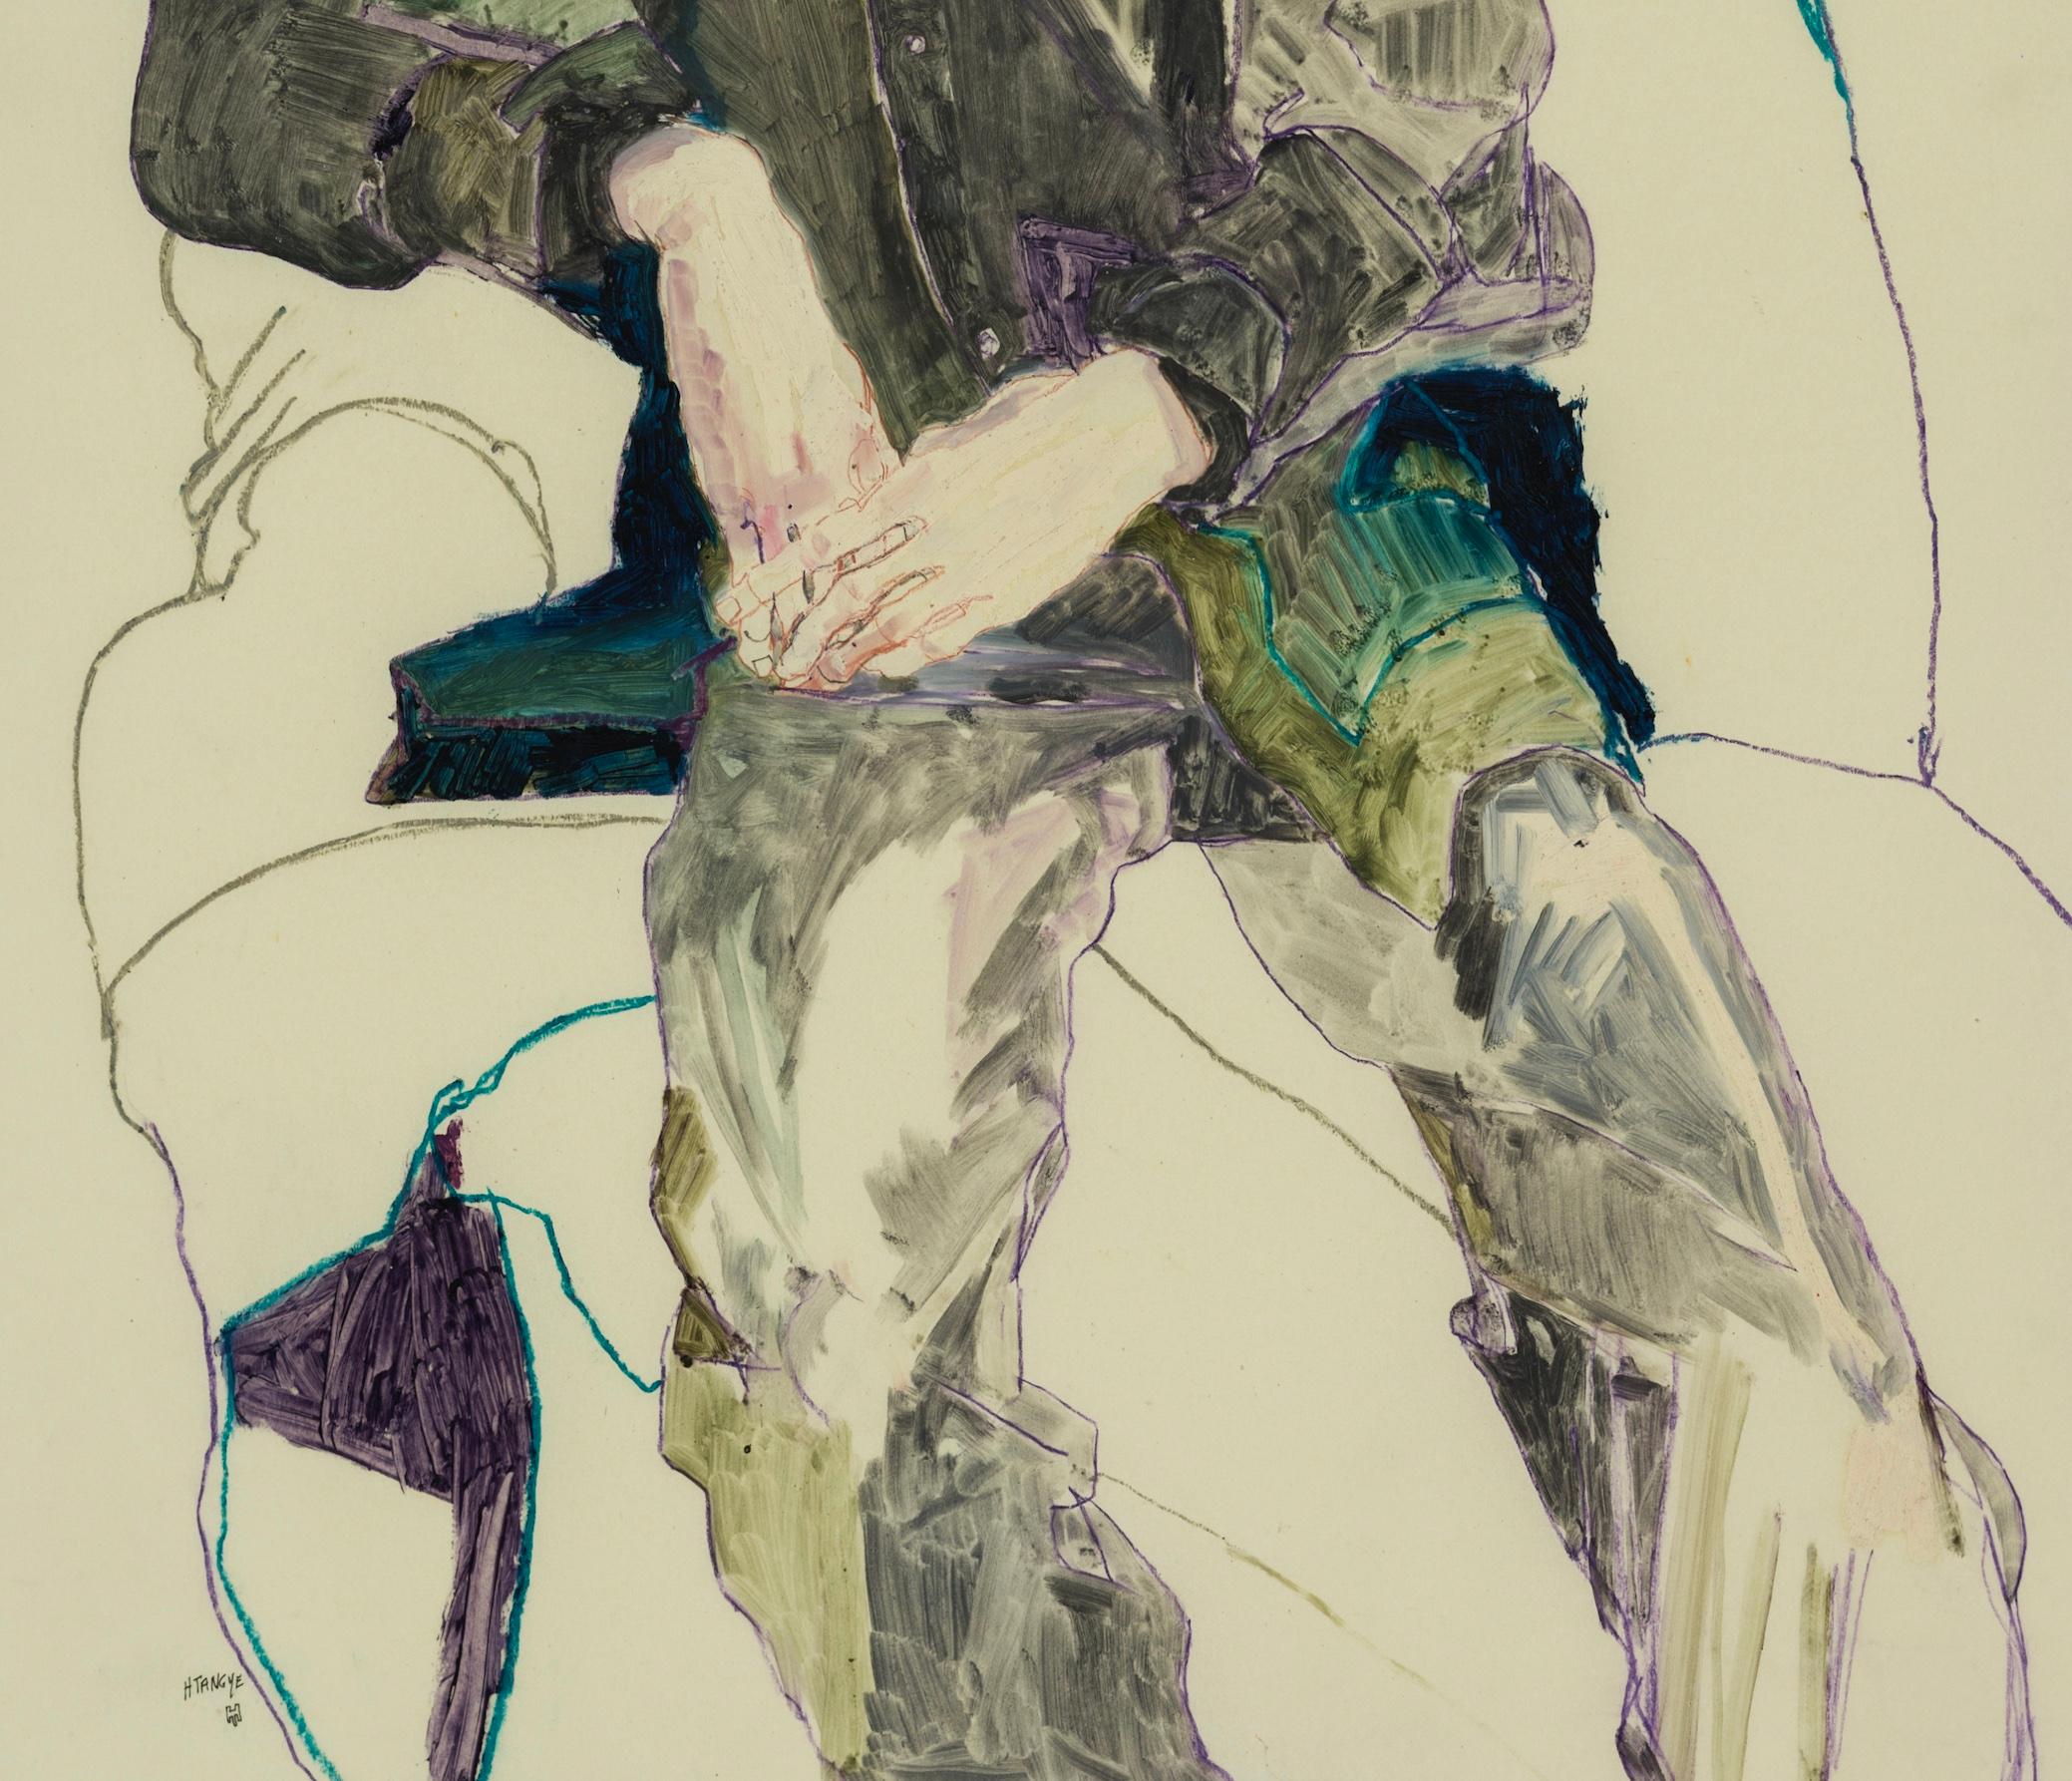 Lee Hurst (3/4 Figure, Hands Together), Mixed media on Pergamenata parchment - Contemporary Art by Howard Tangye